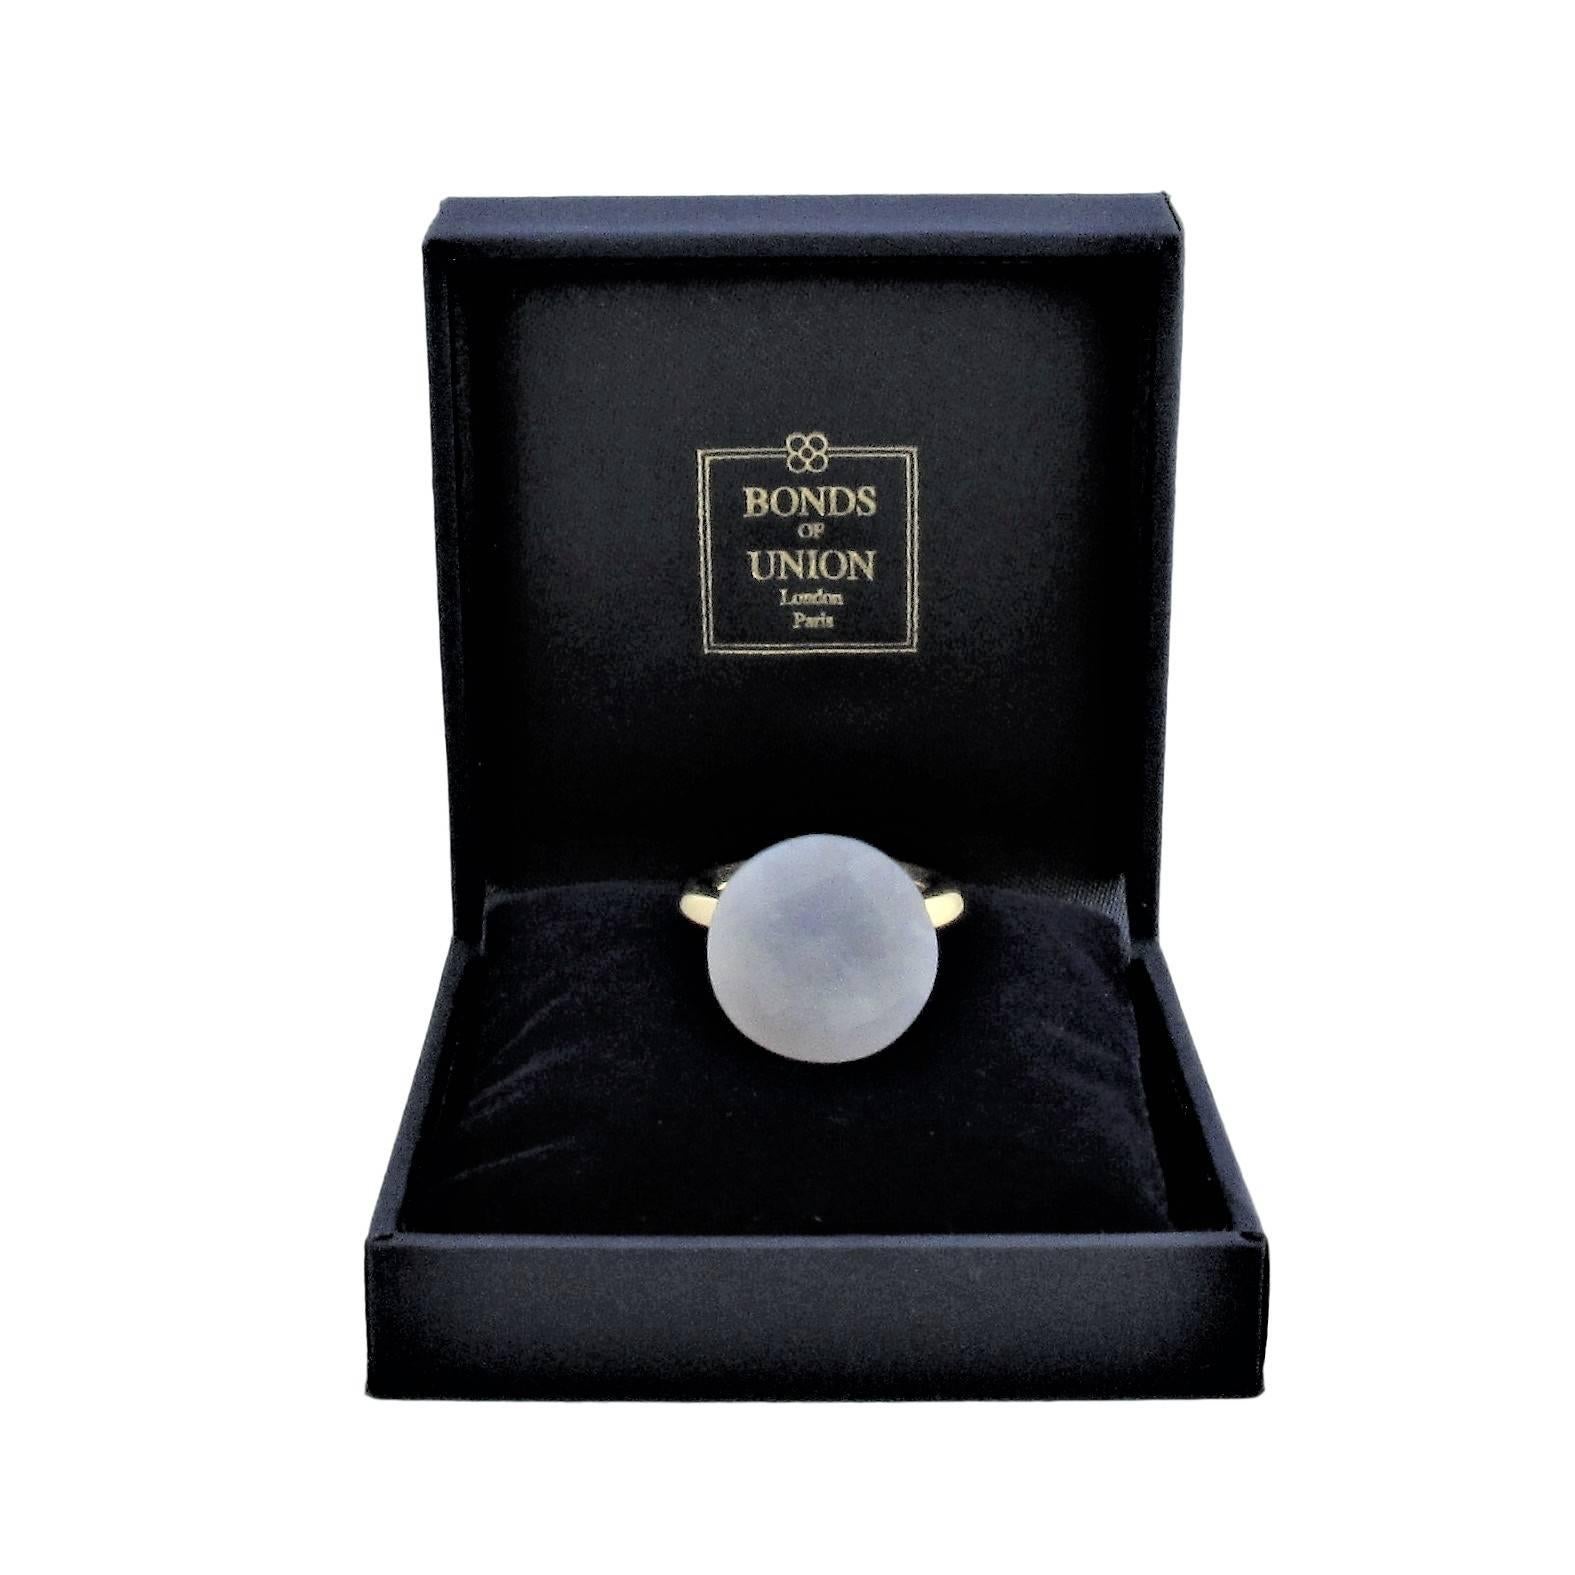 Series Les Voyages:  ' To a Dream Planet ! '  Atelier Bonds. Limited Edition of 18.
Round faceted white chalcedony on cup. Circular band.
18ct French yellow gold plated
Signed BELLESSORT
Available in sizes US 5 1/2- 61/2    French 52-54.